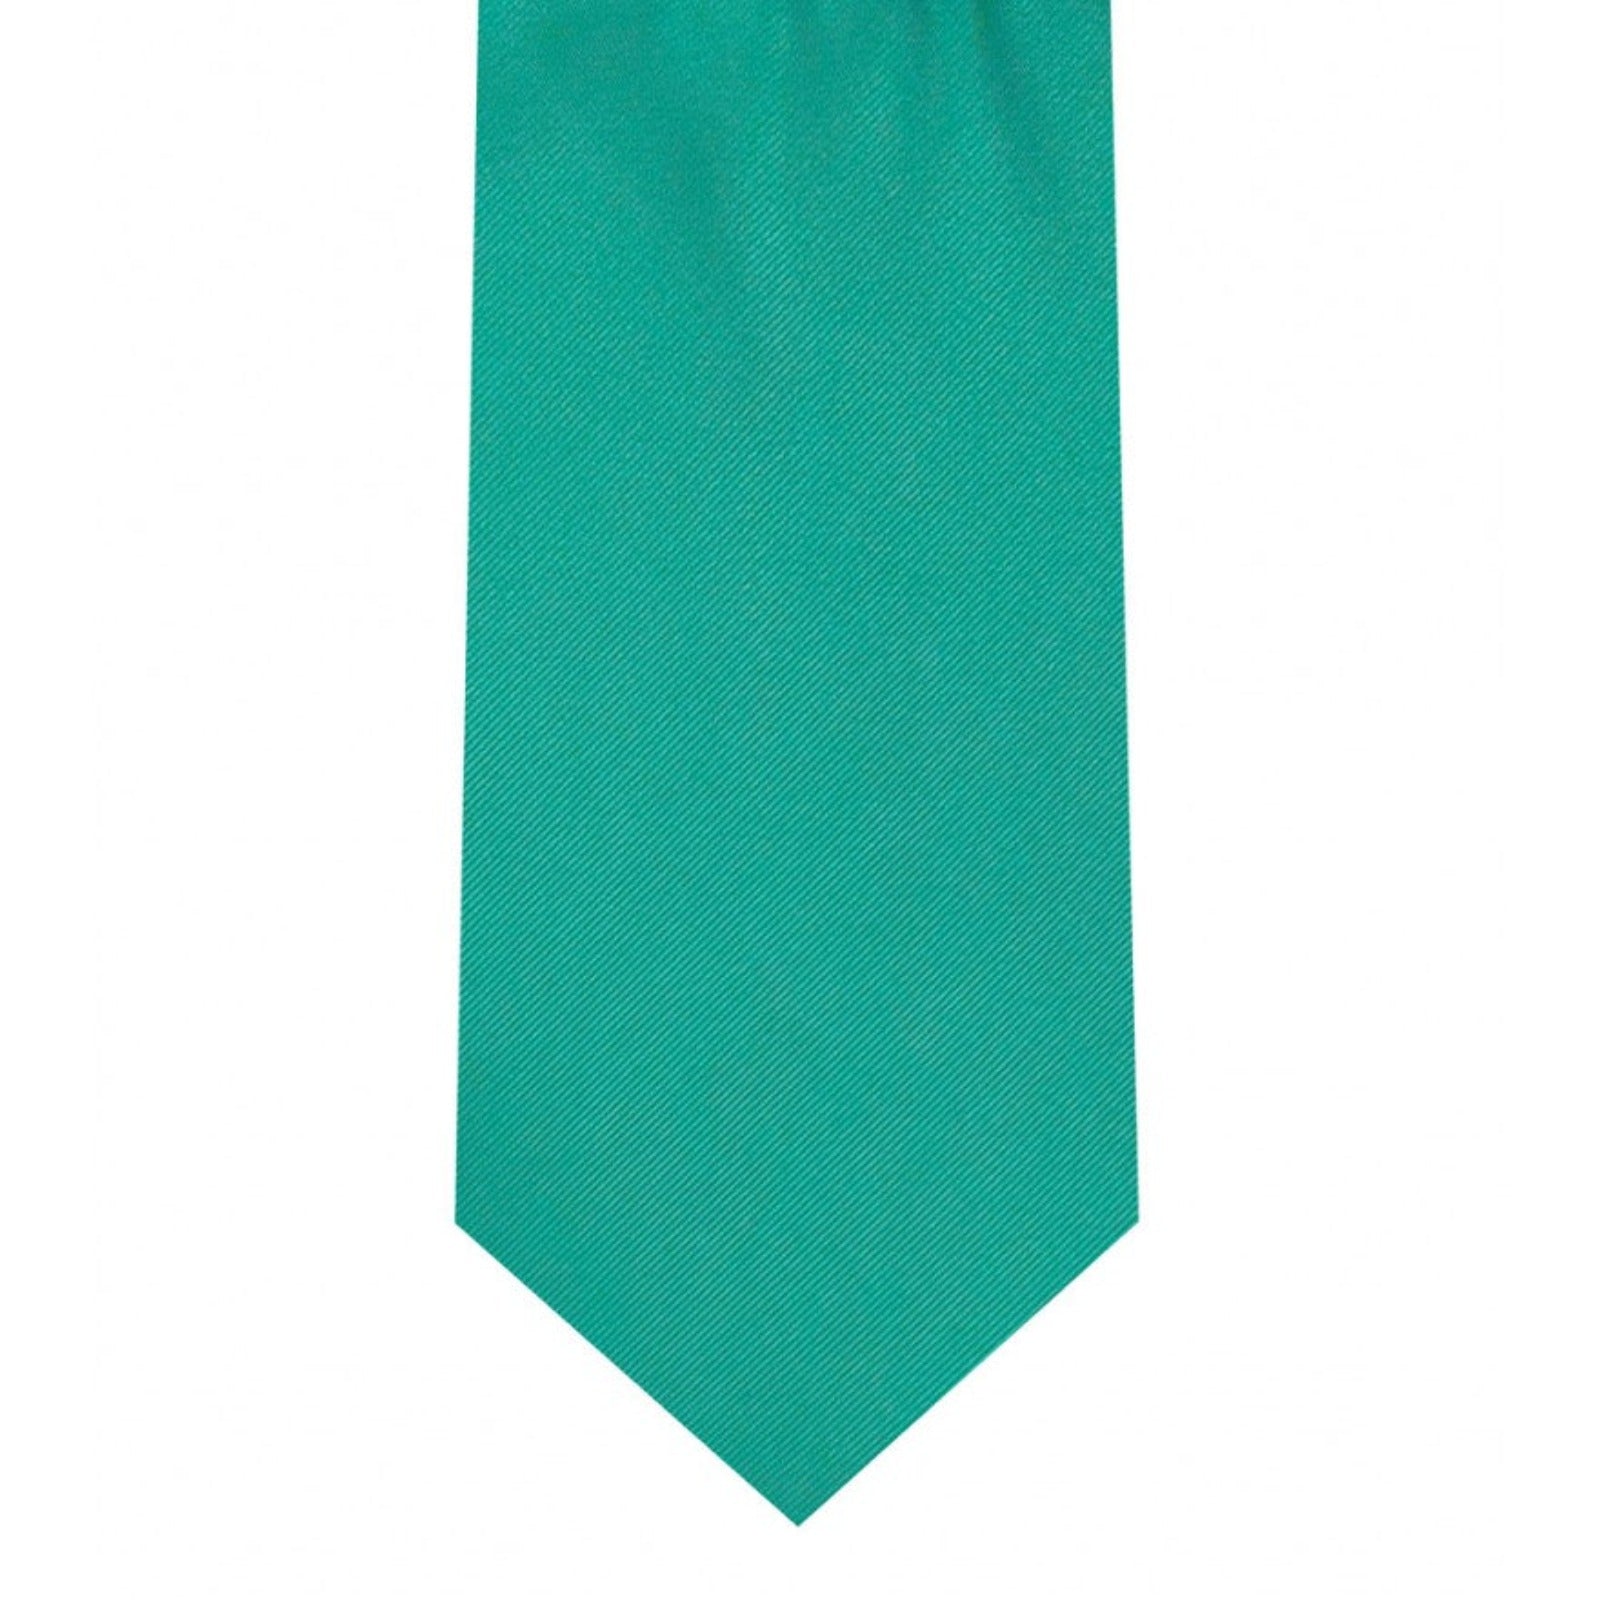 Classic Mermaid Green Tie Skinny width 2.75 inches With Matching Pocket Square | KCT Menswear